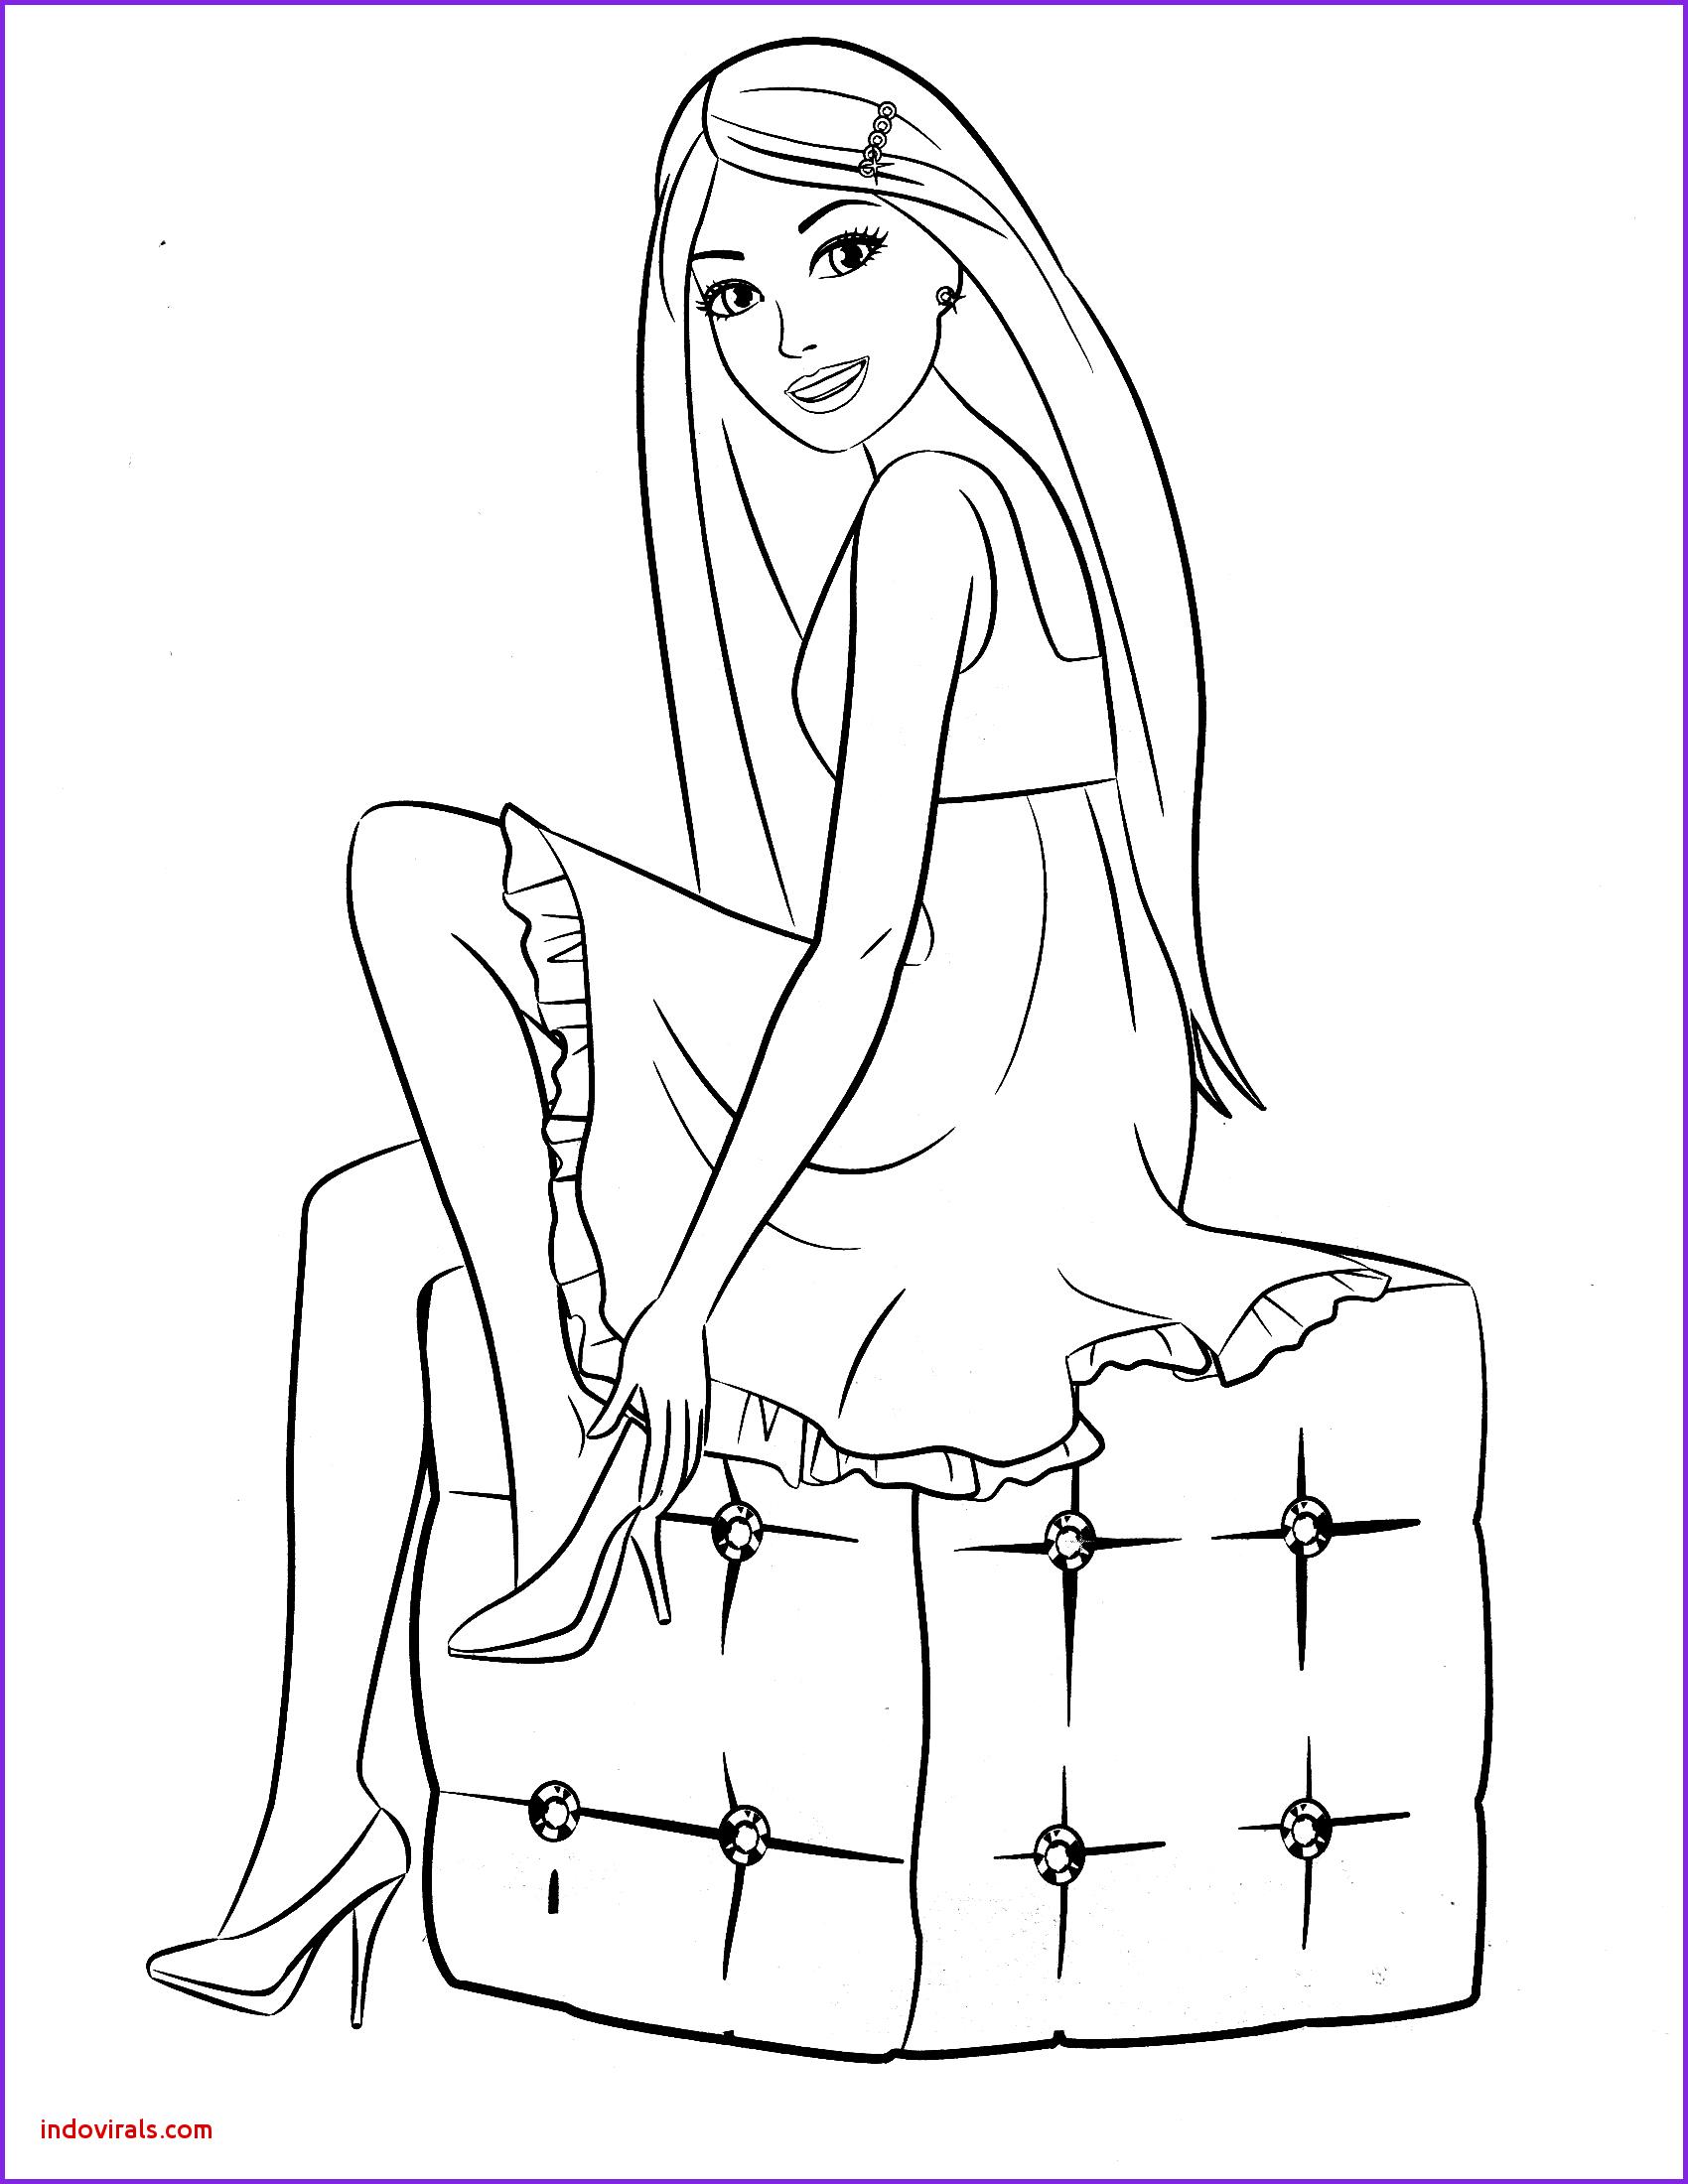 Coloring ~ Barbie And Friends Coloring Pages Colouring Book Uncategorized  Free Games Barbie Colouring Book. Disney Princess Colouring Book. Barbie  Coloring Book Videos On Dailymotion Youtube. Free Barbie Colouring Book.